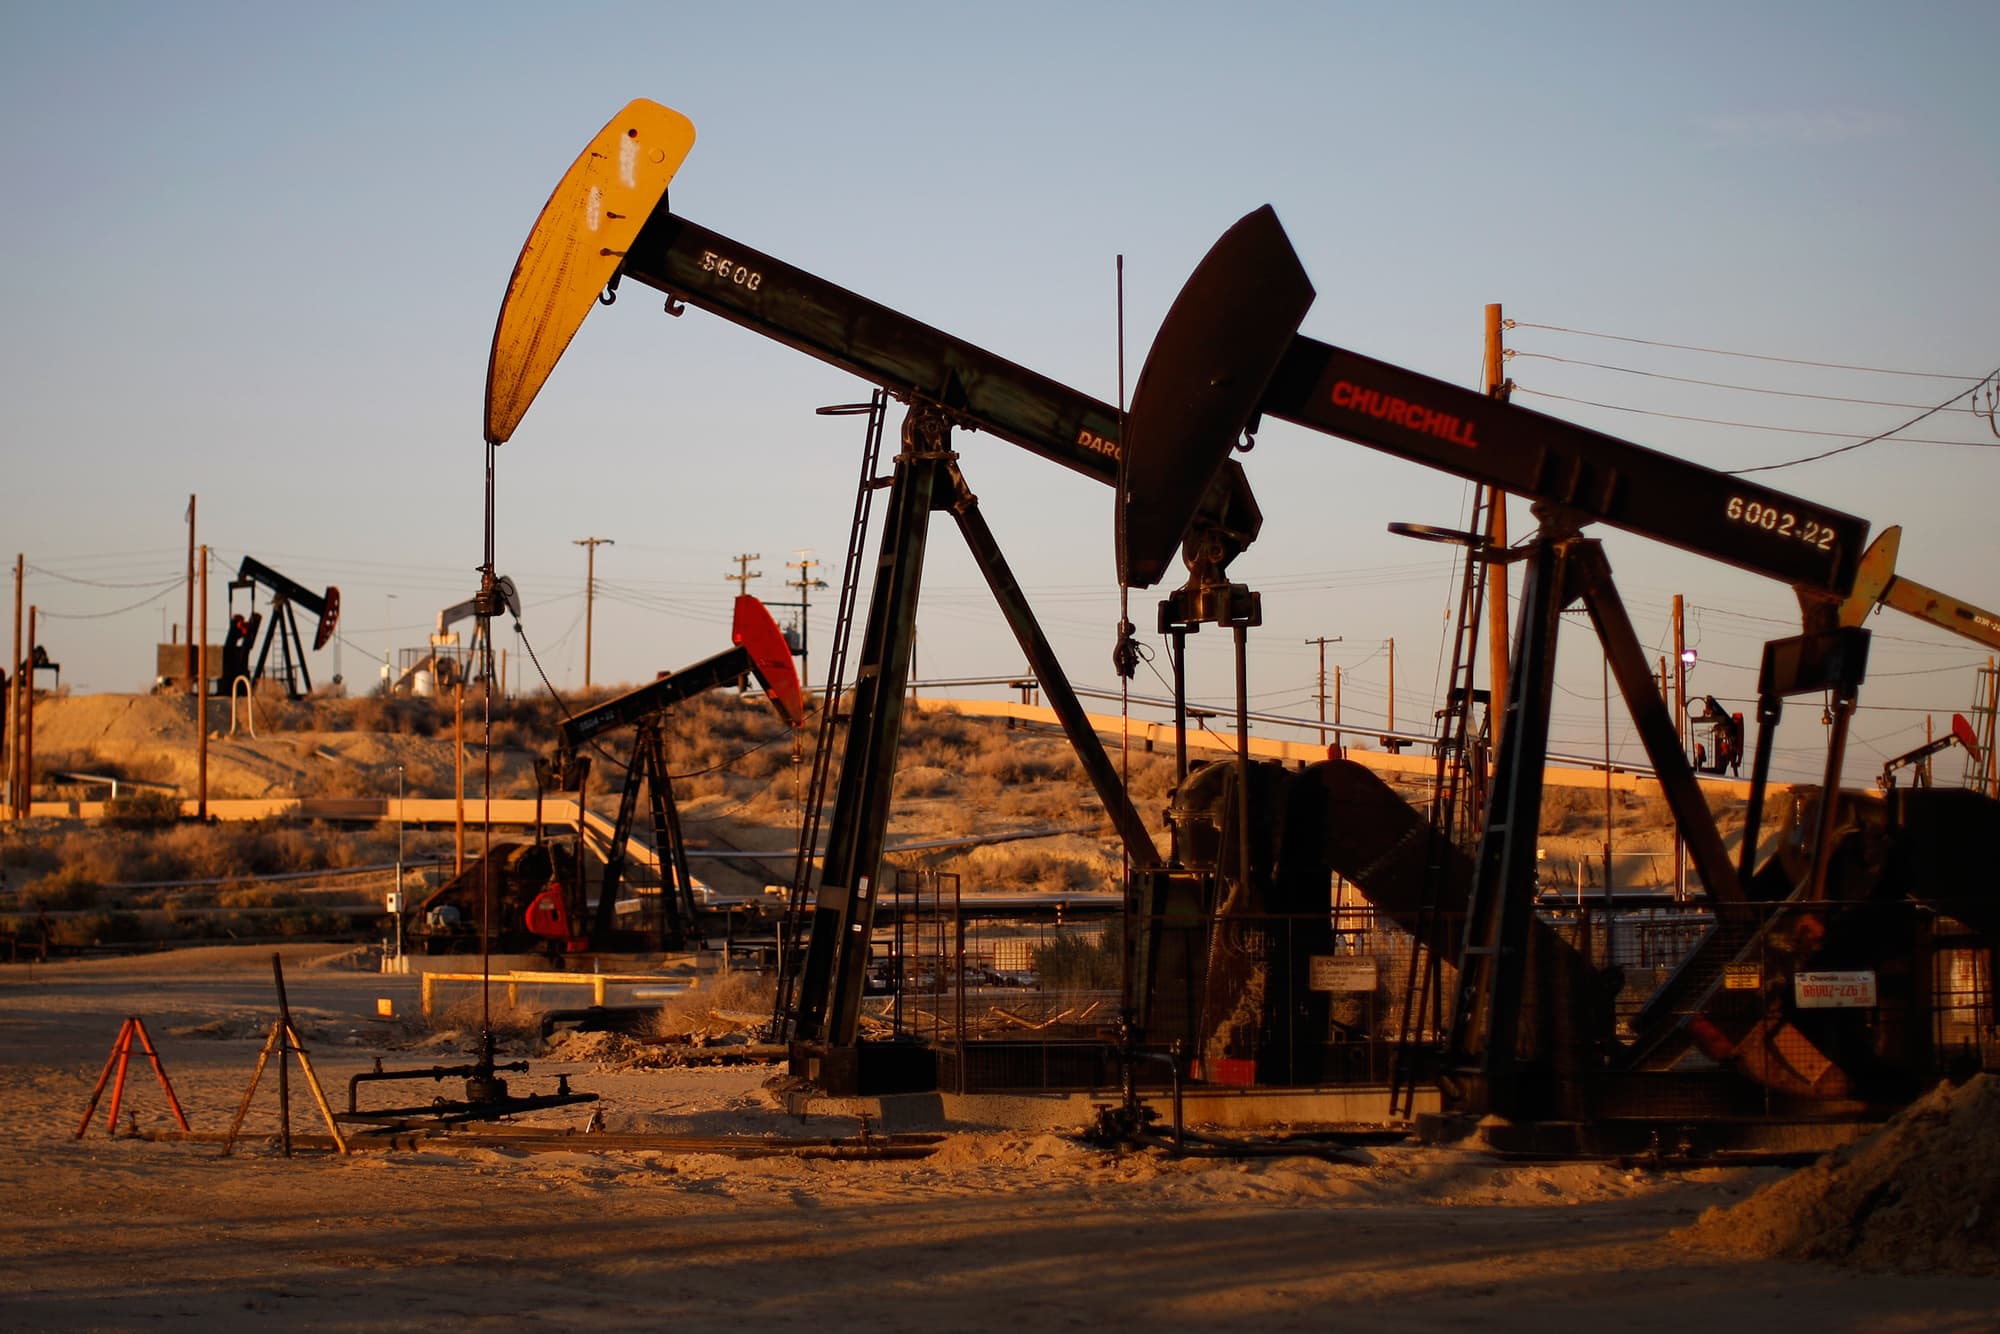 Oil prices likely to continue to struggle in Q4 as demand lags and economic data fluctuates 